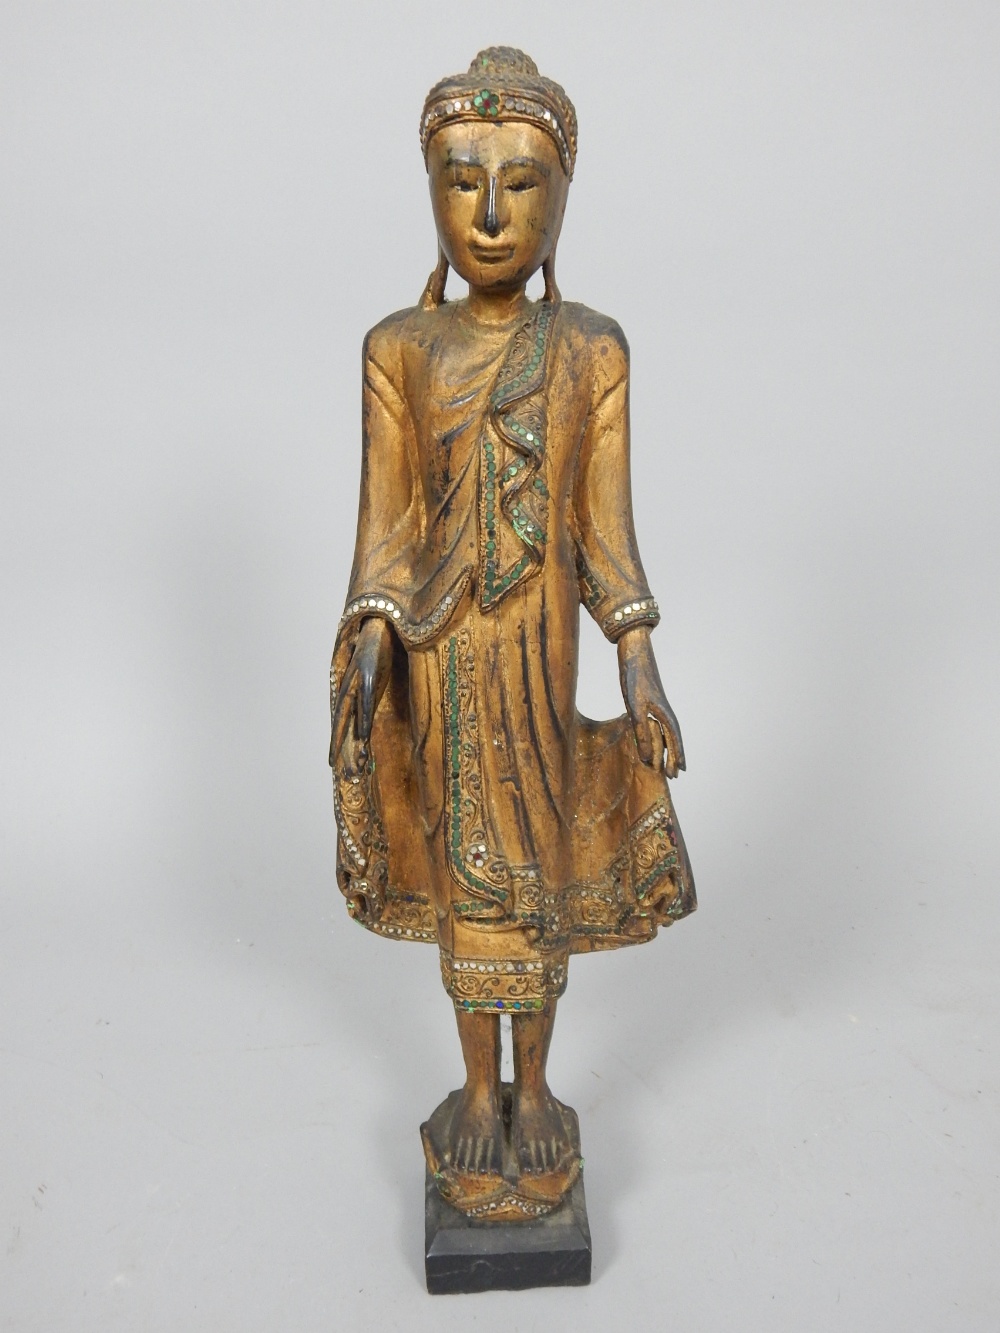 Carved study of Buddha, gilded and jewelled, c.